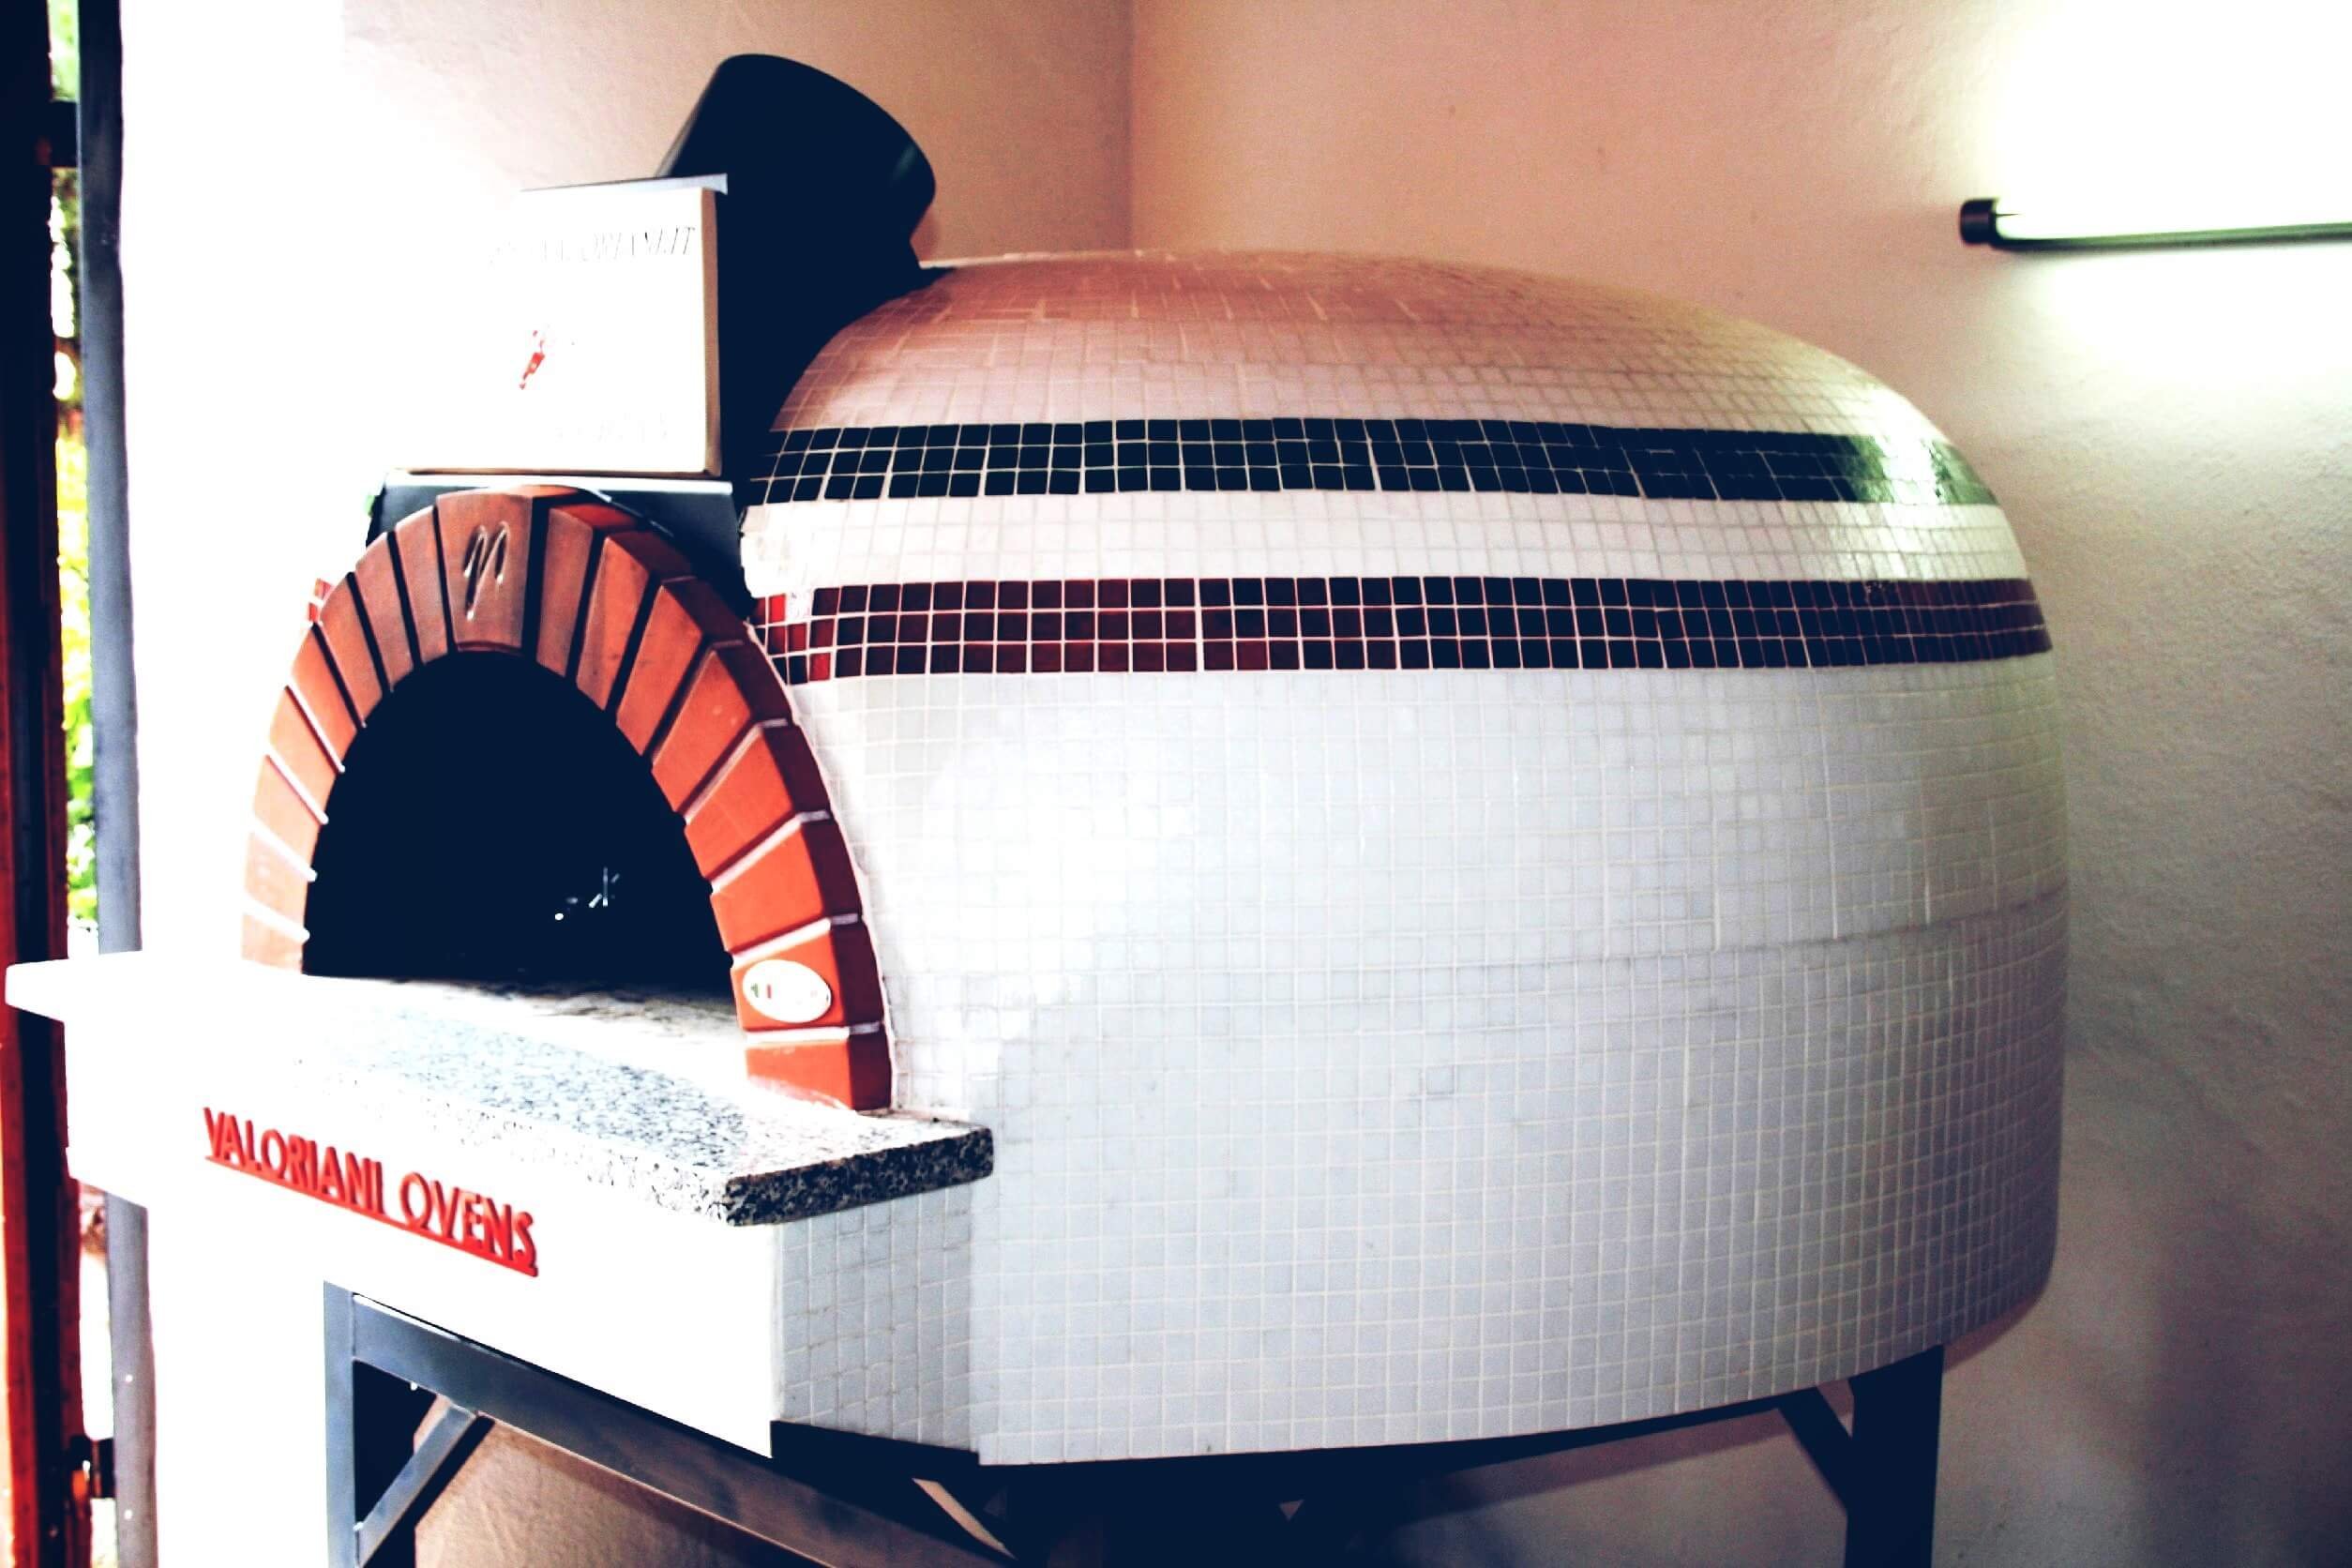 Professional pizza and baking oven, wood firing for continuous firing, Valoriani Vesuvio GR, 160cm